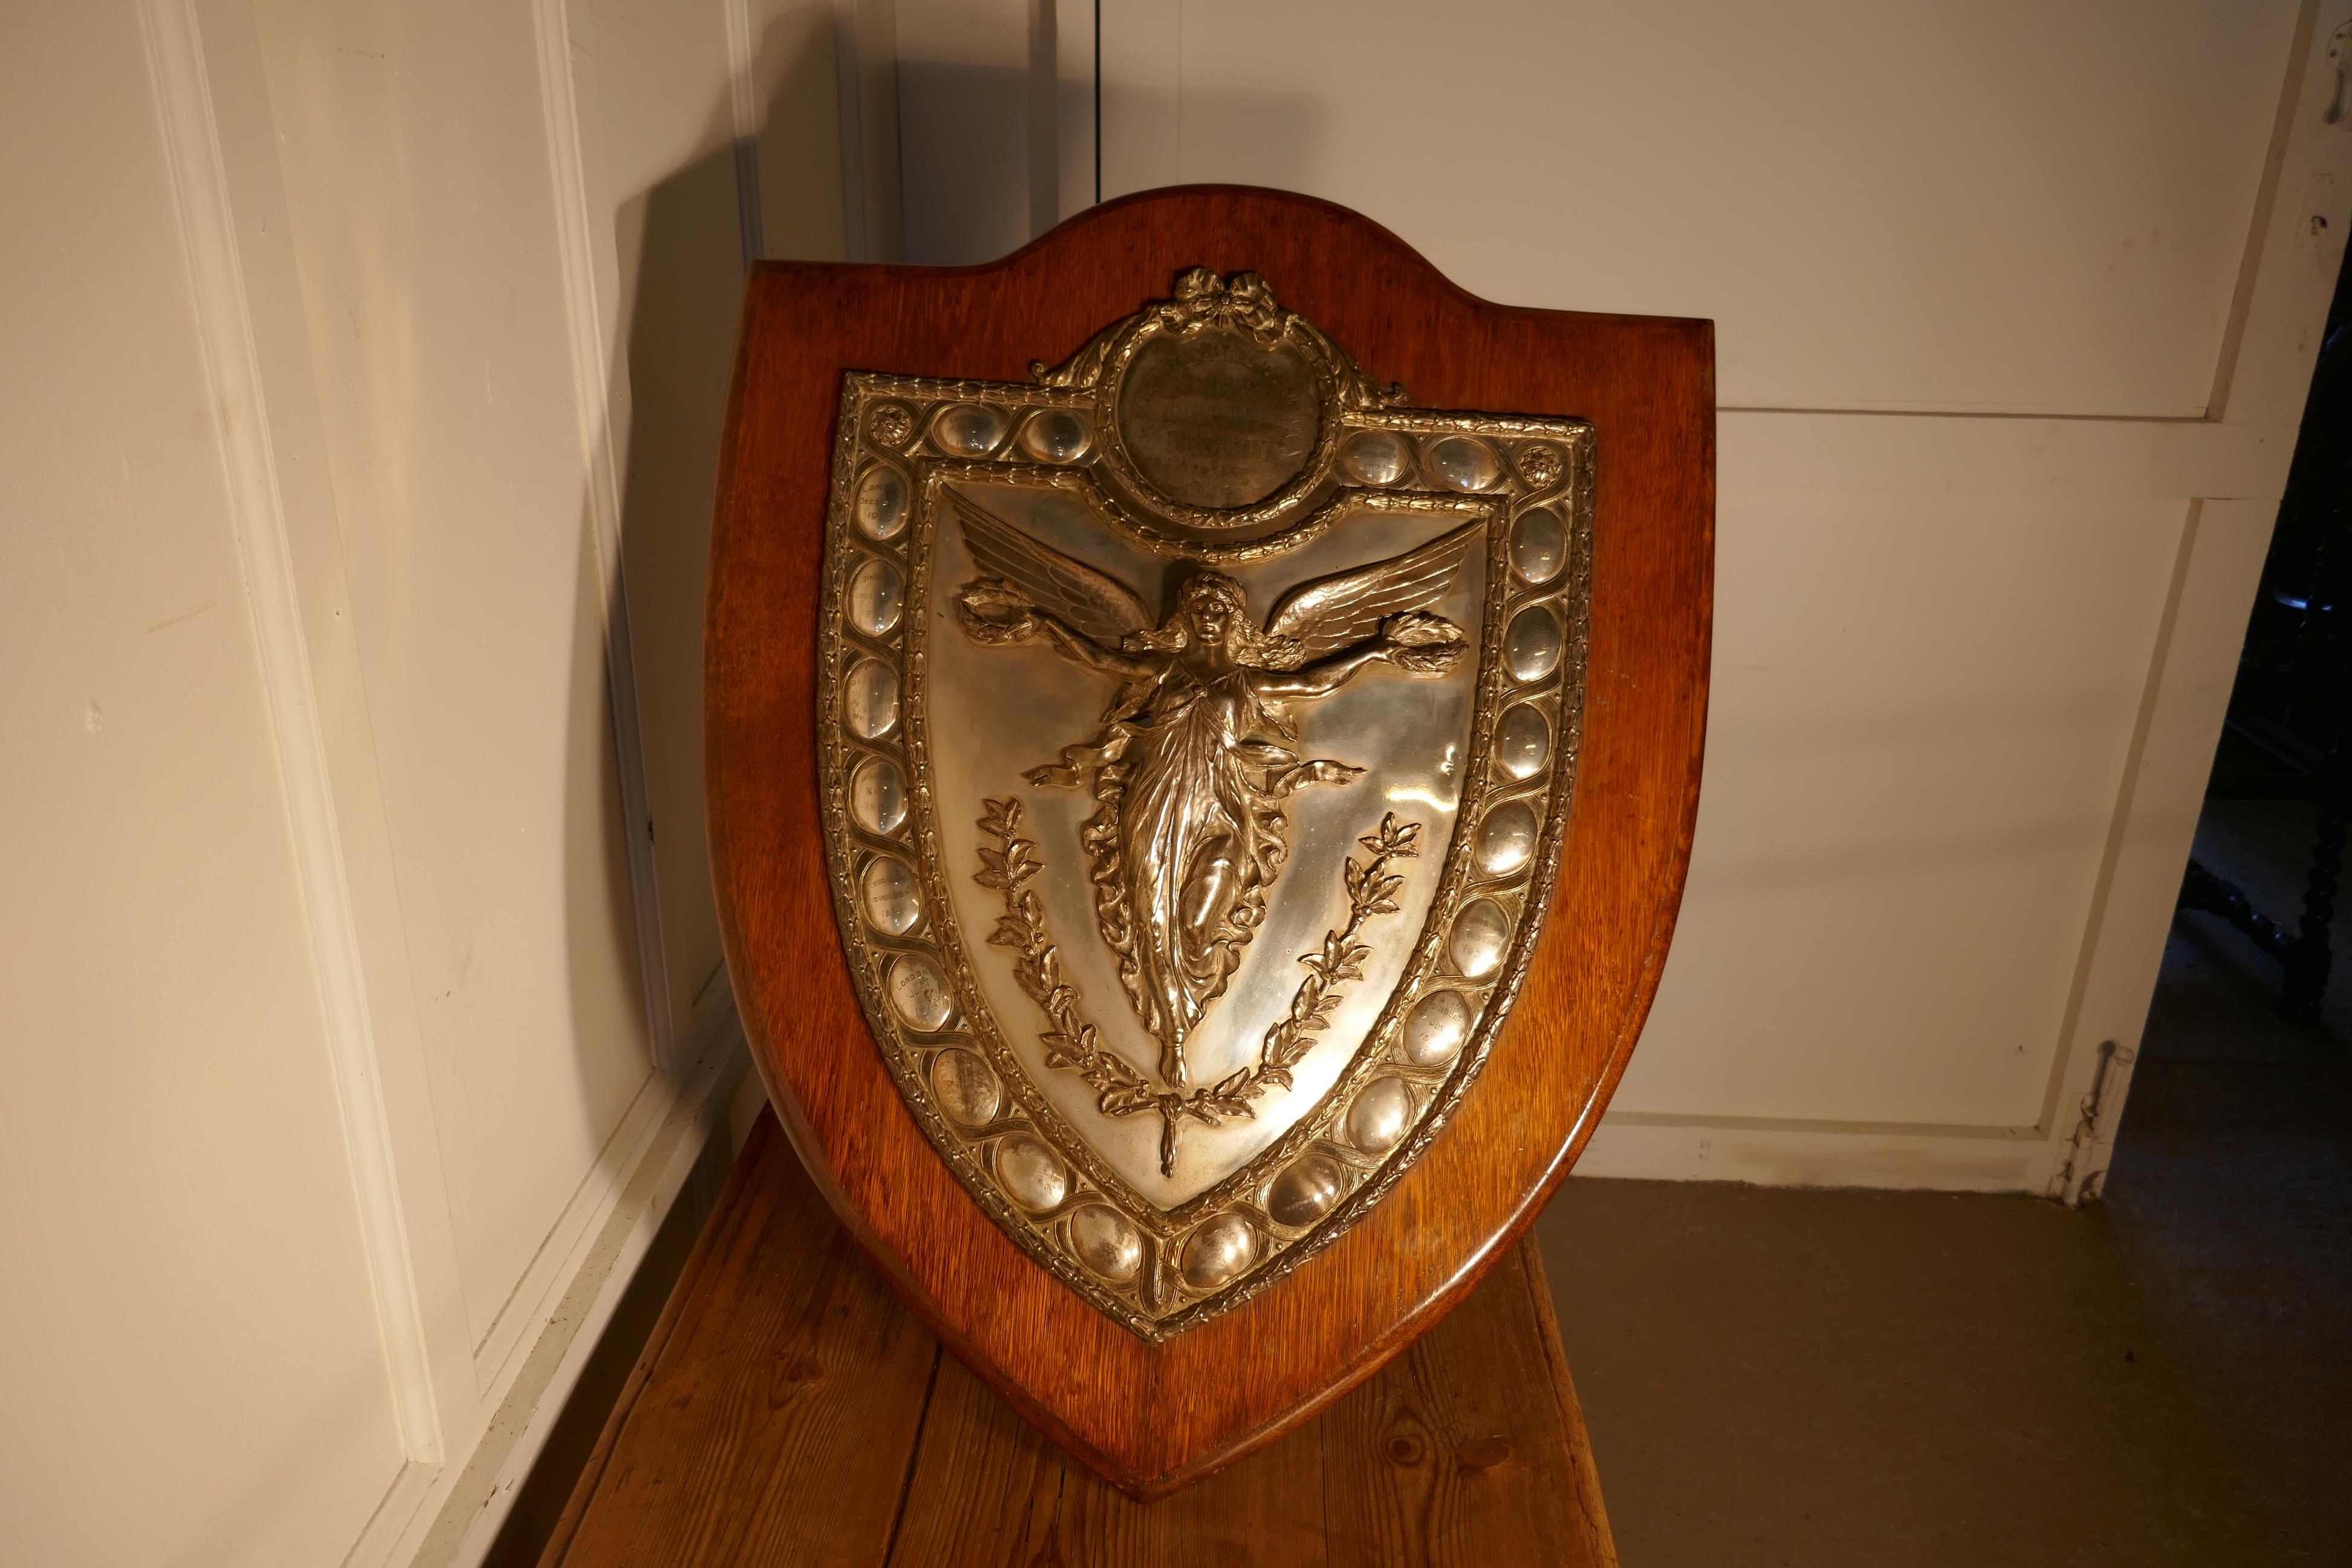 Large Arts and Crafts Shield Trophy with Nike the Goddess of Victory 

The is a very impressive Arts and Crafts piece, the Golden Oak shield has a large silver plated mount, in the centre there Nike the Winged Greek Goddess of Victory celebrating